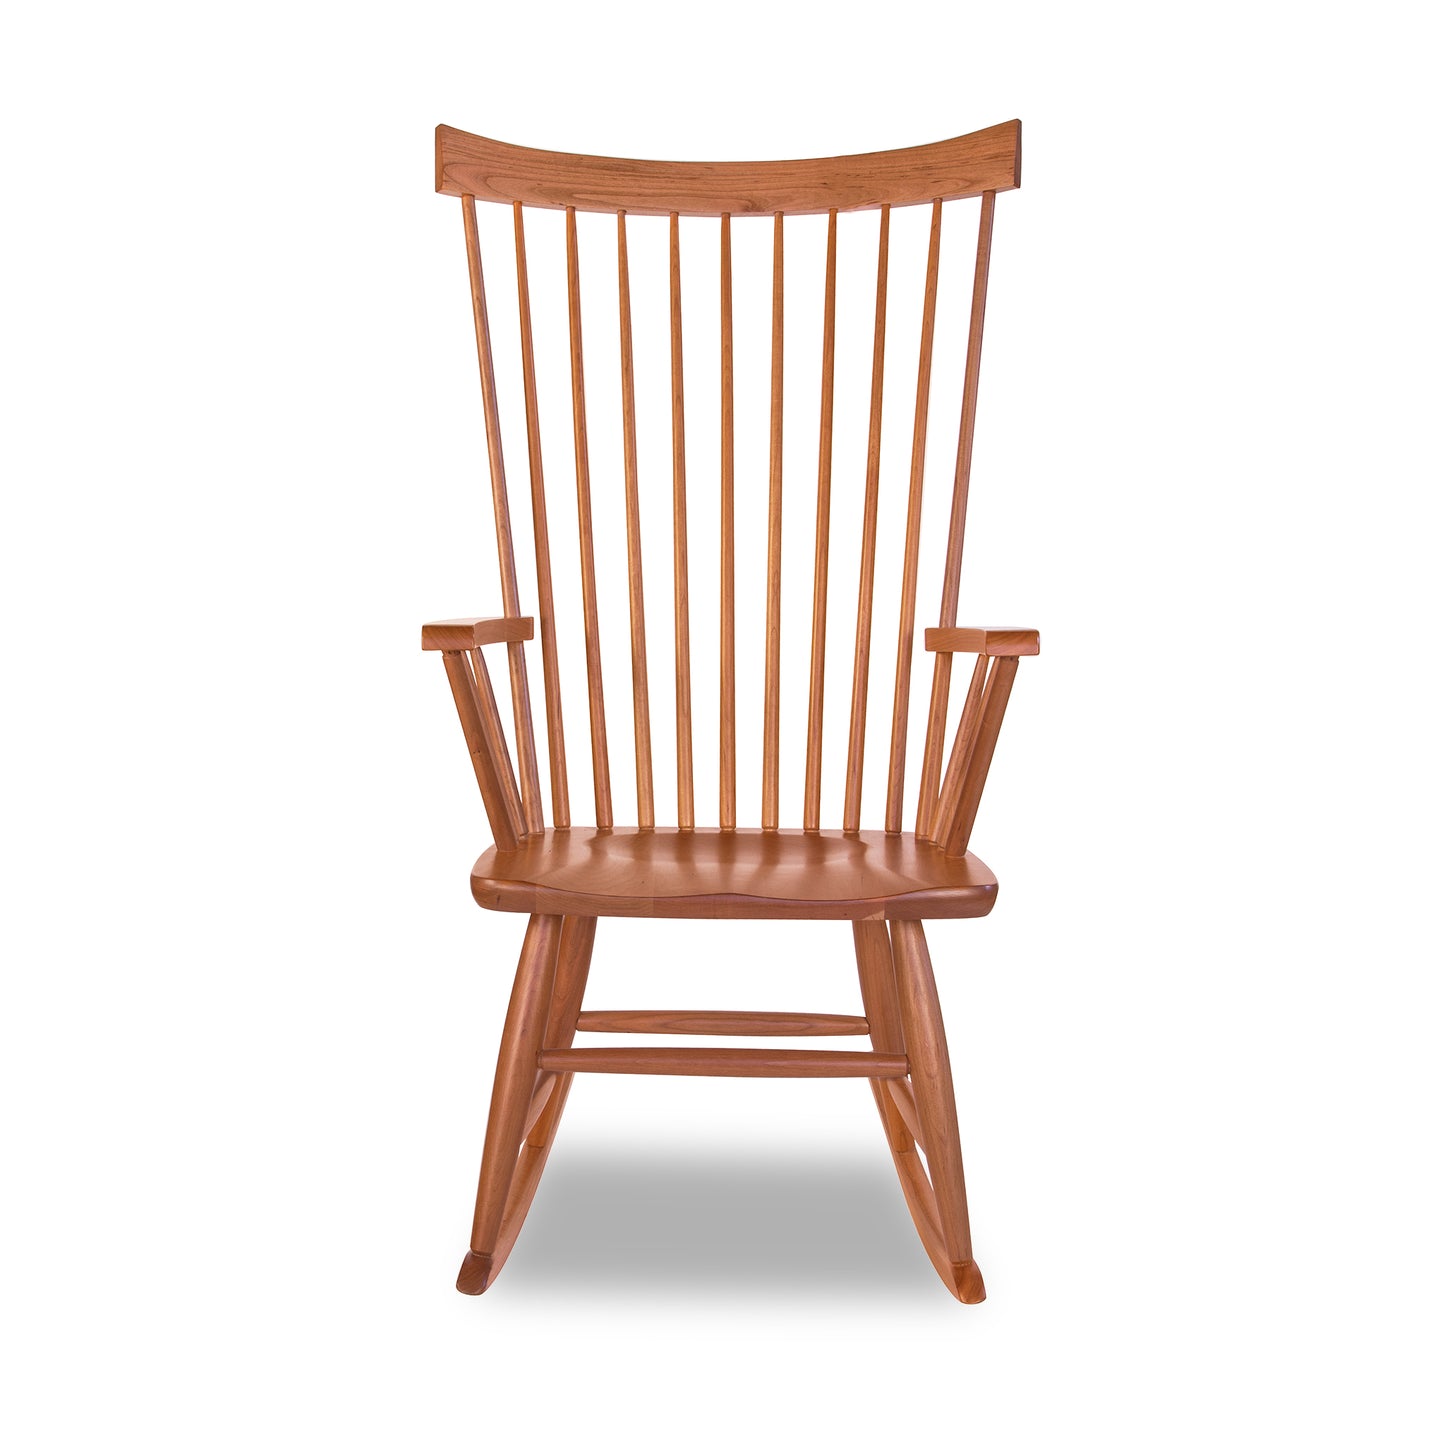 A luxurious Lyndon Furniture Windsor Rocking Chair on a white background.